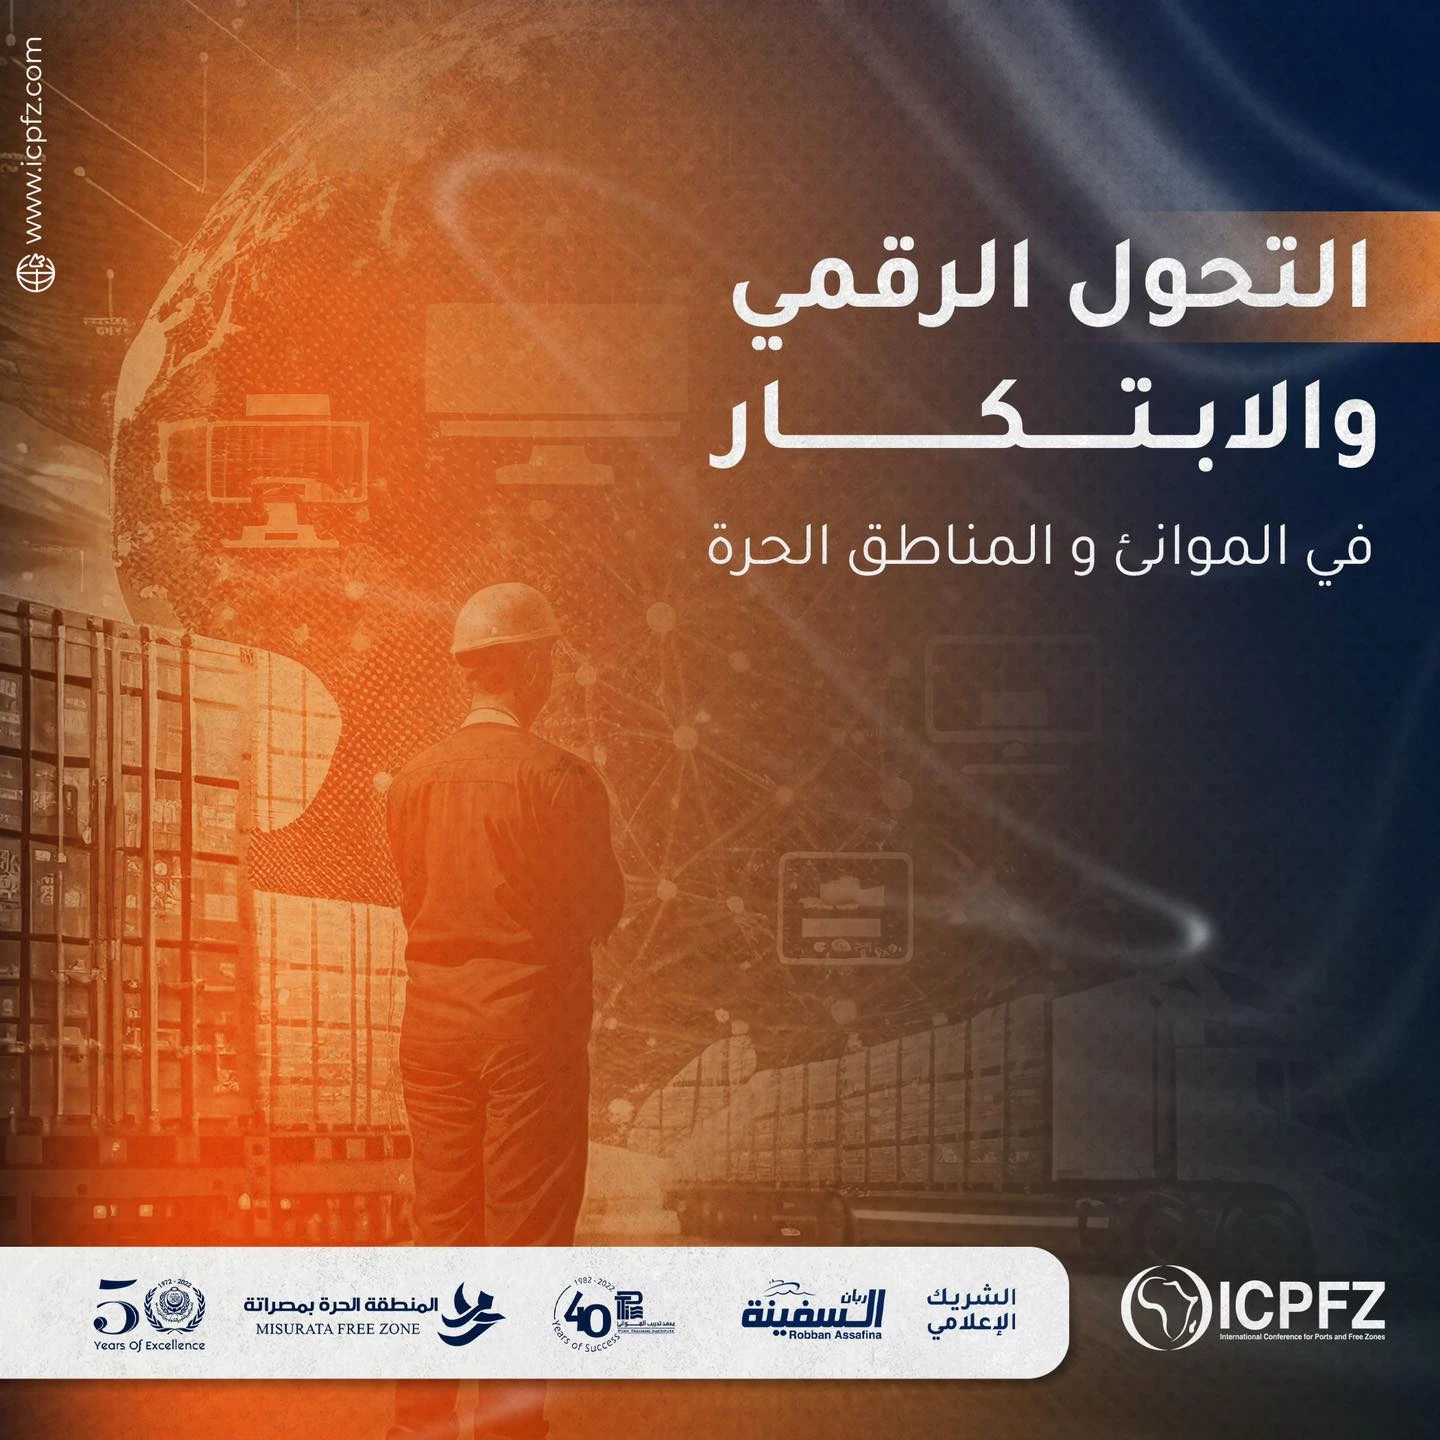 The International North African Ports and Free Zones Conference and Exhibition5